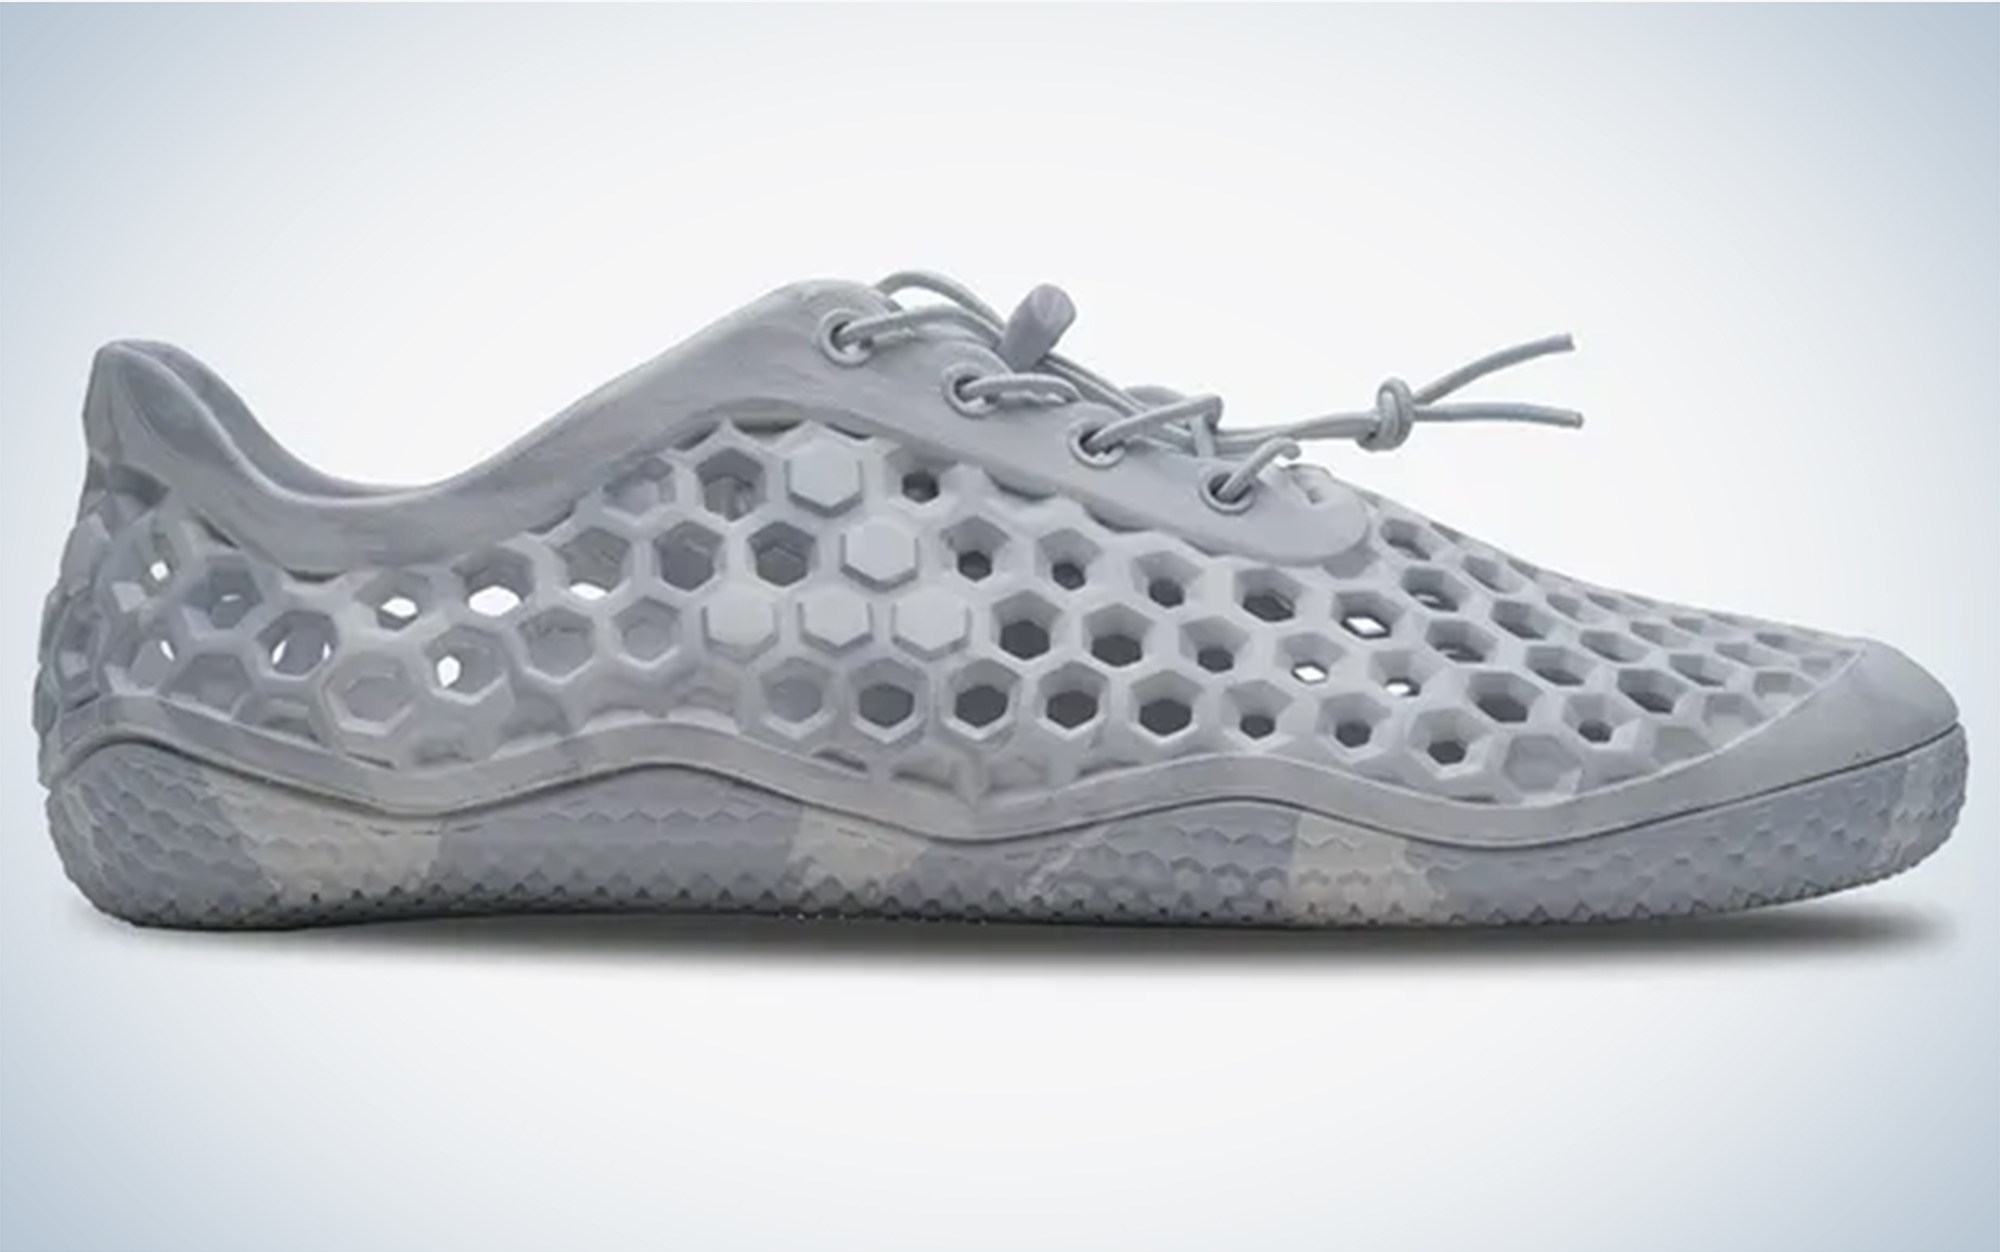 The Vivobarefoot Ultra III BloomÂ  is one of the best camp shoes.